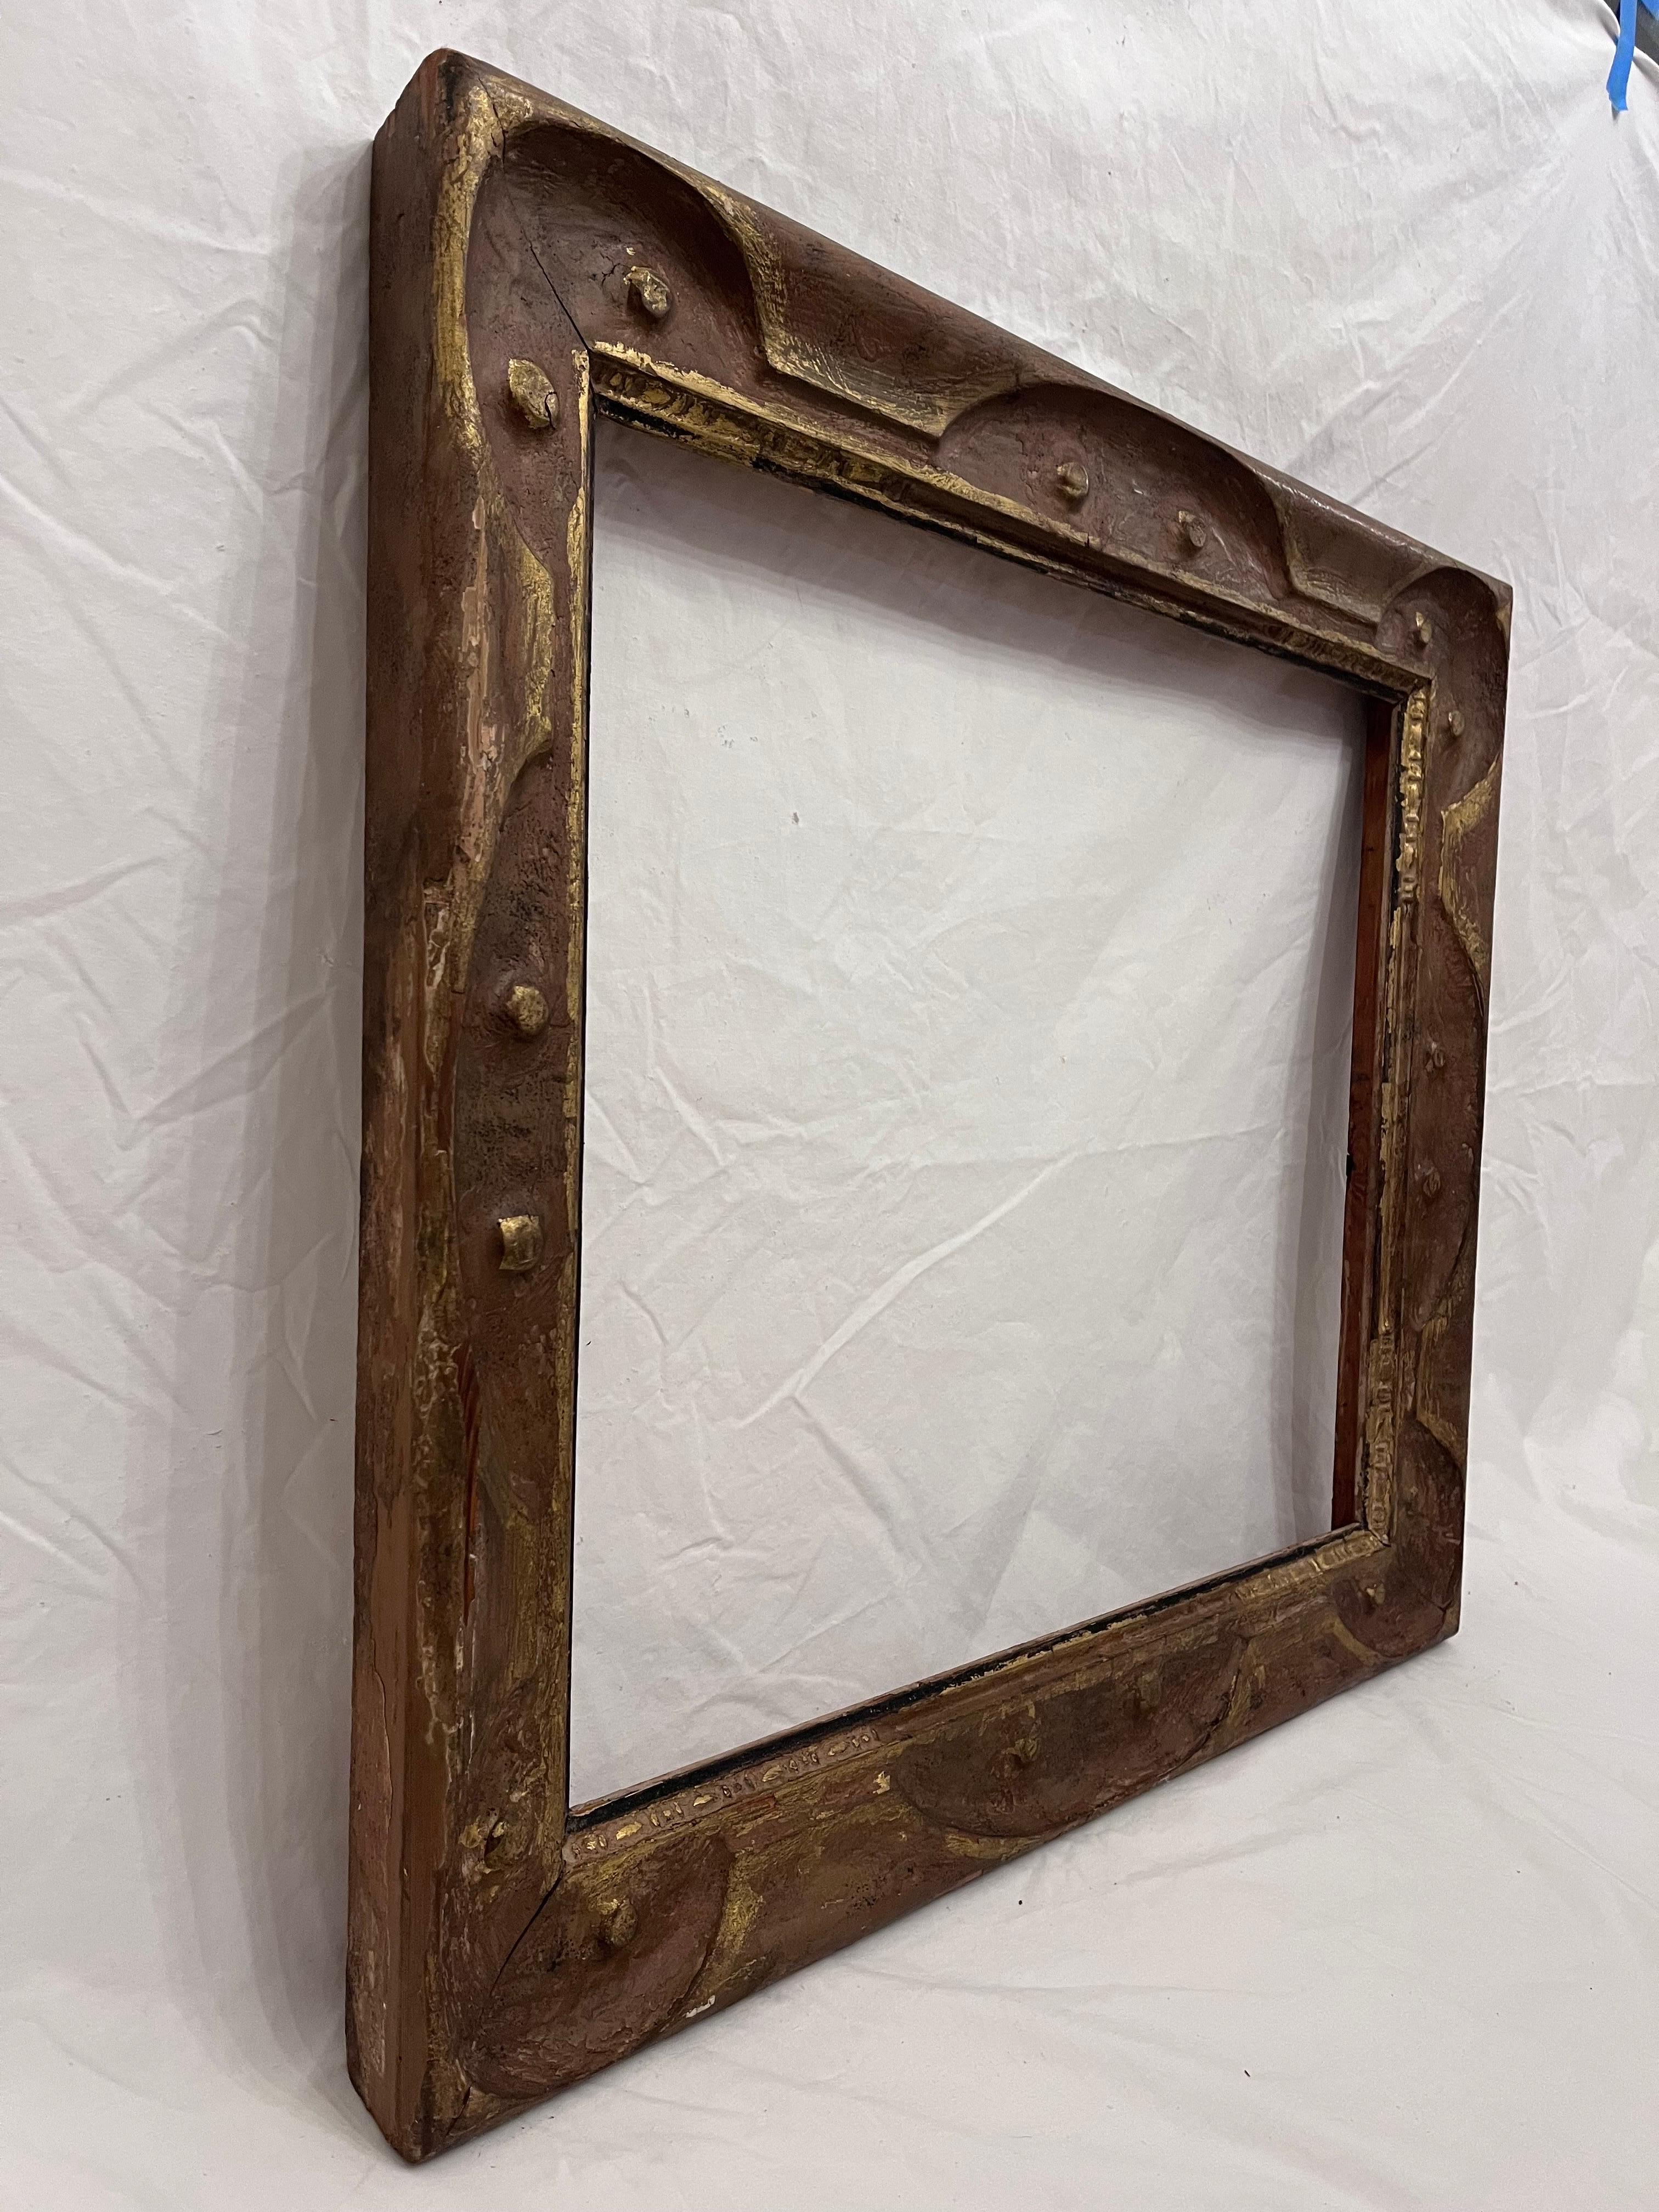 A rare and important, hand carved and hand finished, Modernist early 20th Century circa 1920's - 1930's American painting frame from the famed Carnegie Museum of Art in Pittsburgh. The rabbet size (size that holds the art) is 24.5